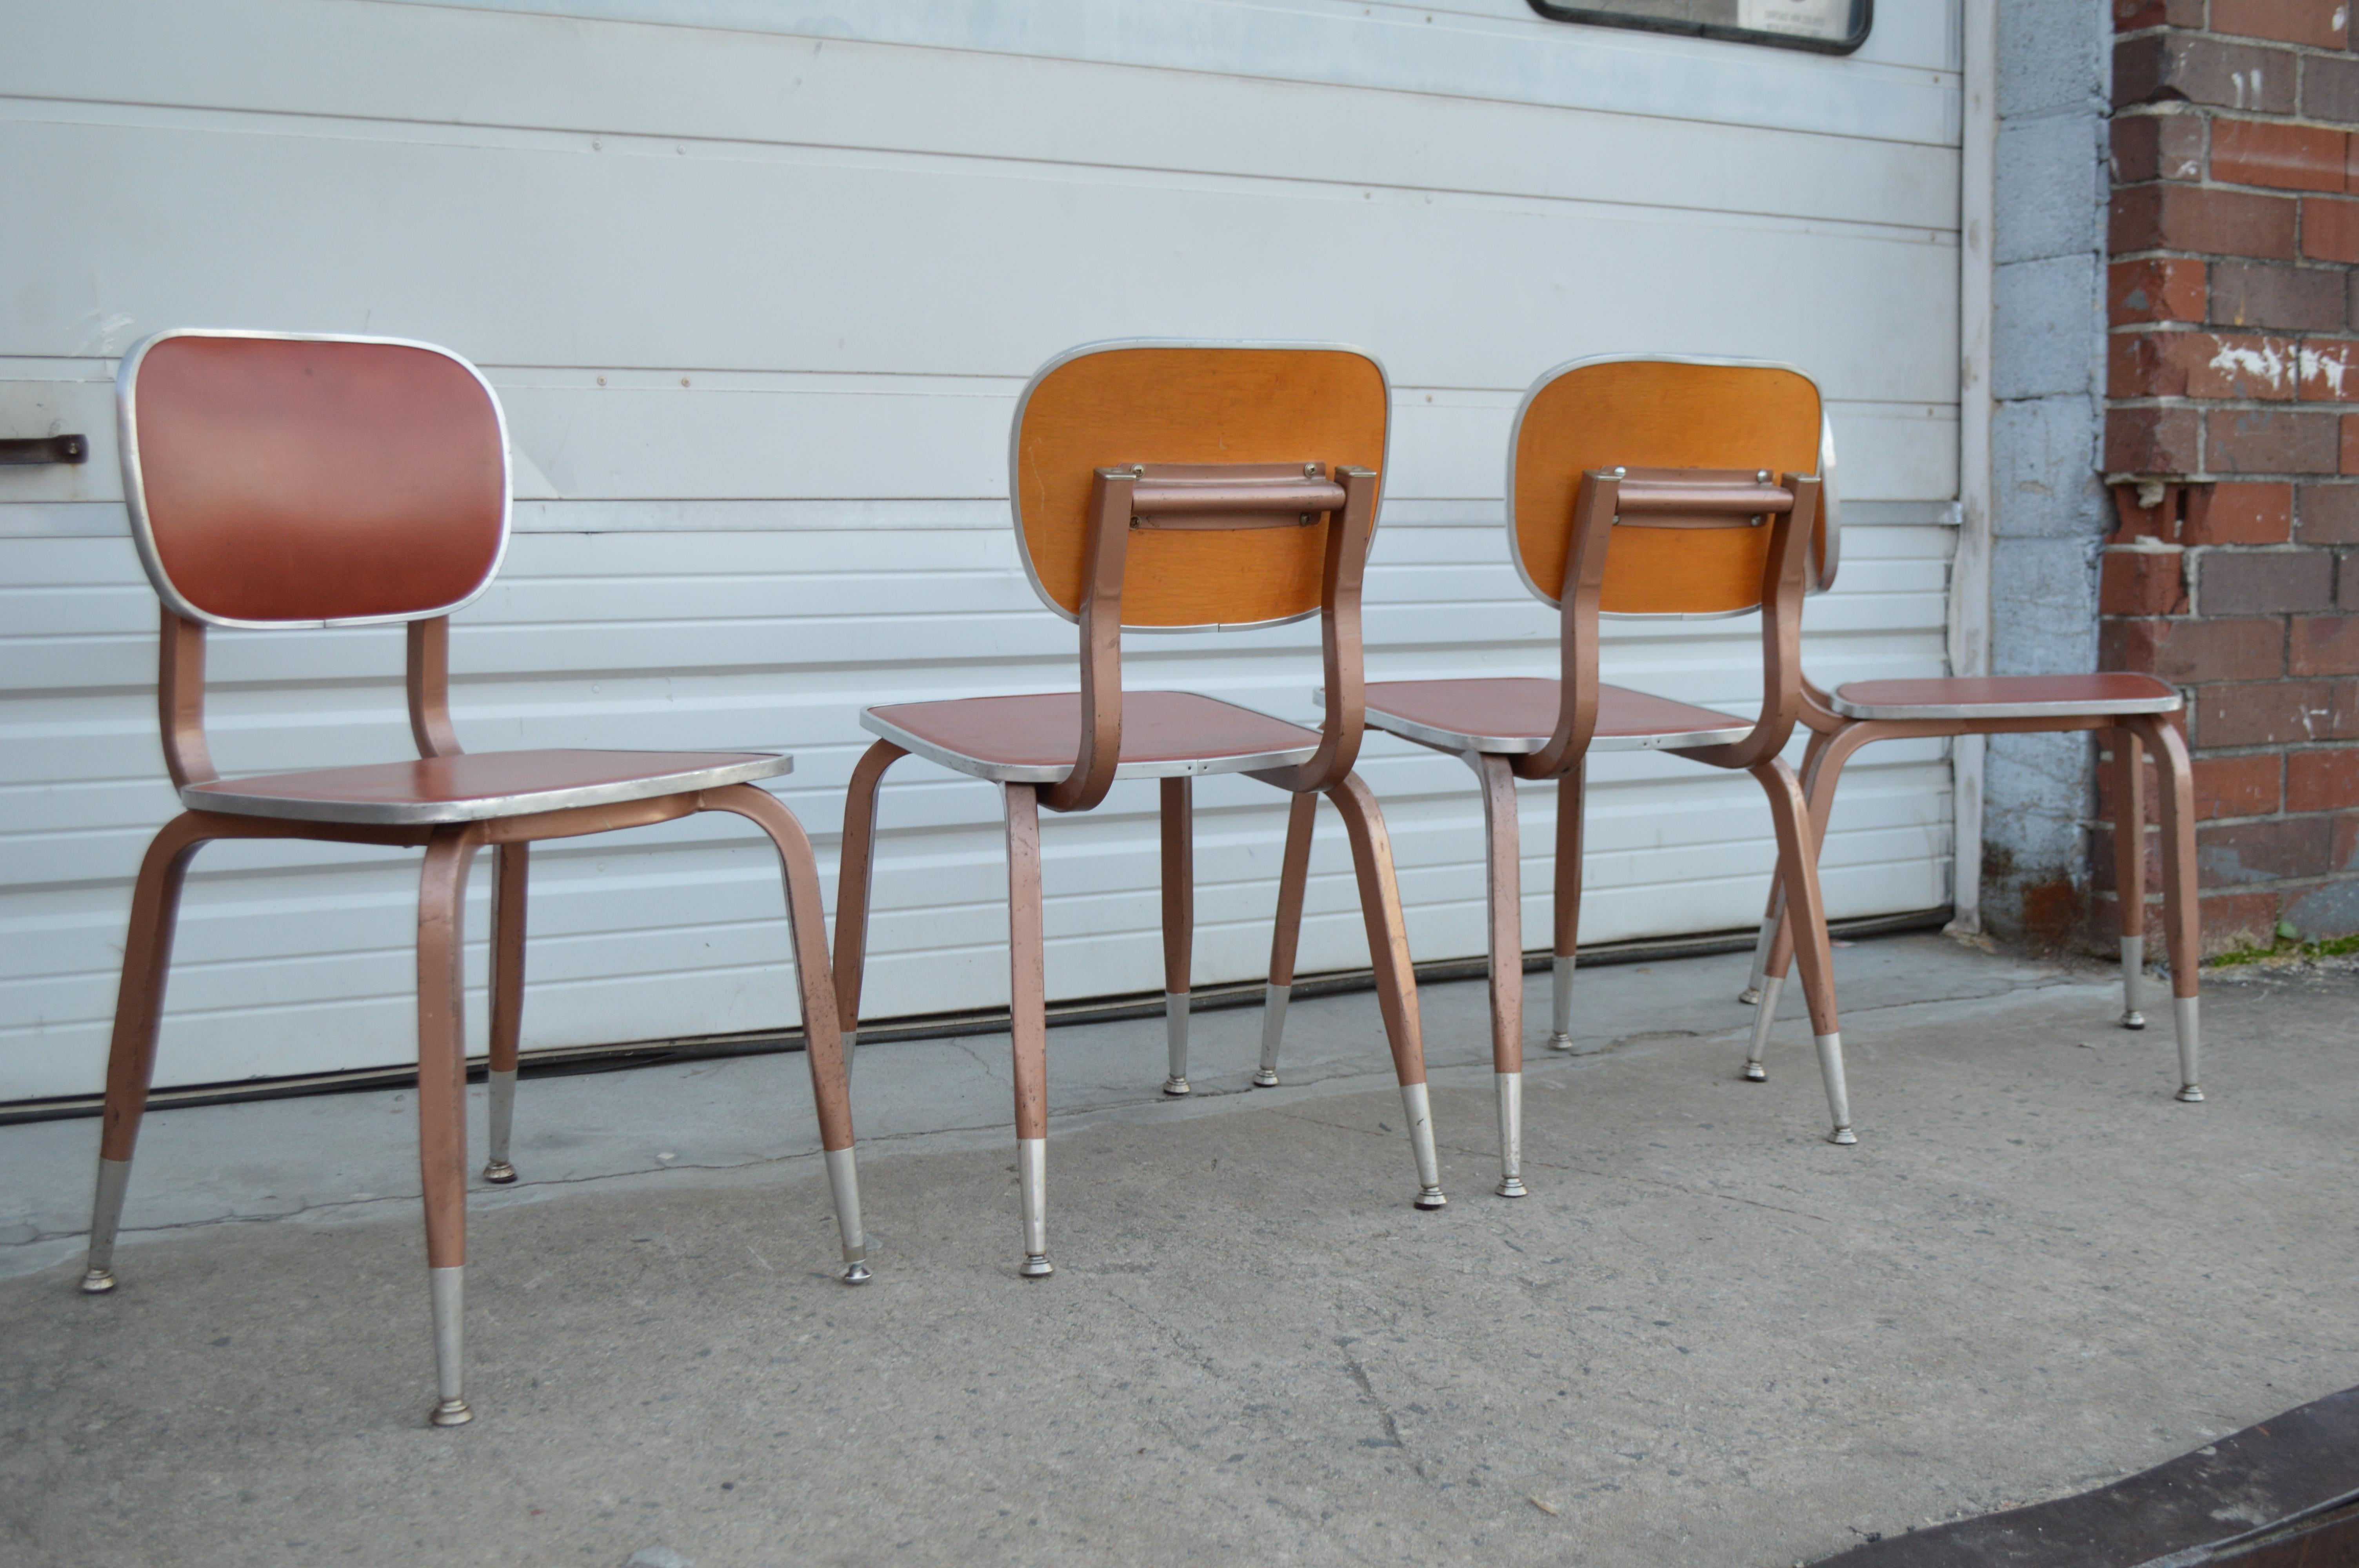 Set of four school style dining or side chairs made of vinyl, plywood, and aluminum. Nicely designed school chairs in style of Friso Kramer. Rust colored vinyl inside back and seat, aluminum frame, and plywood back.